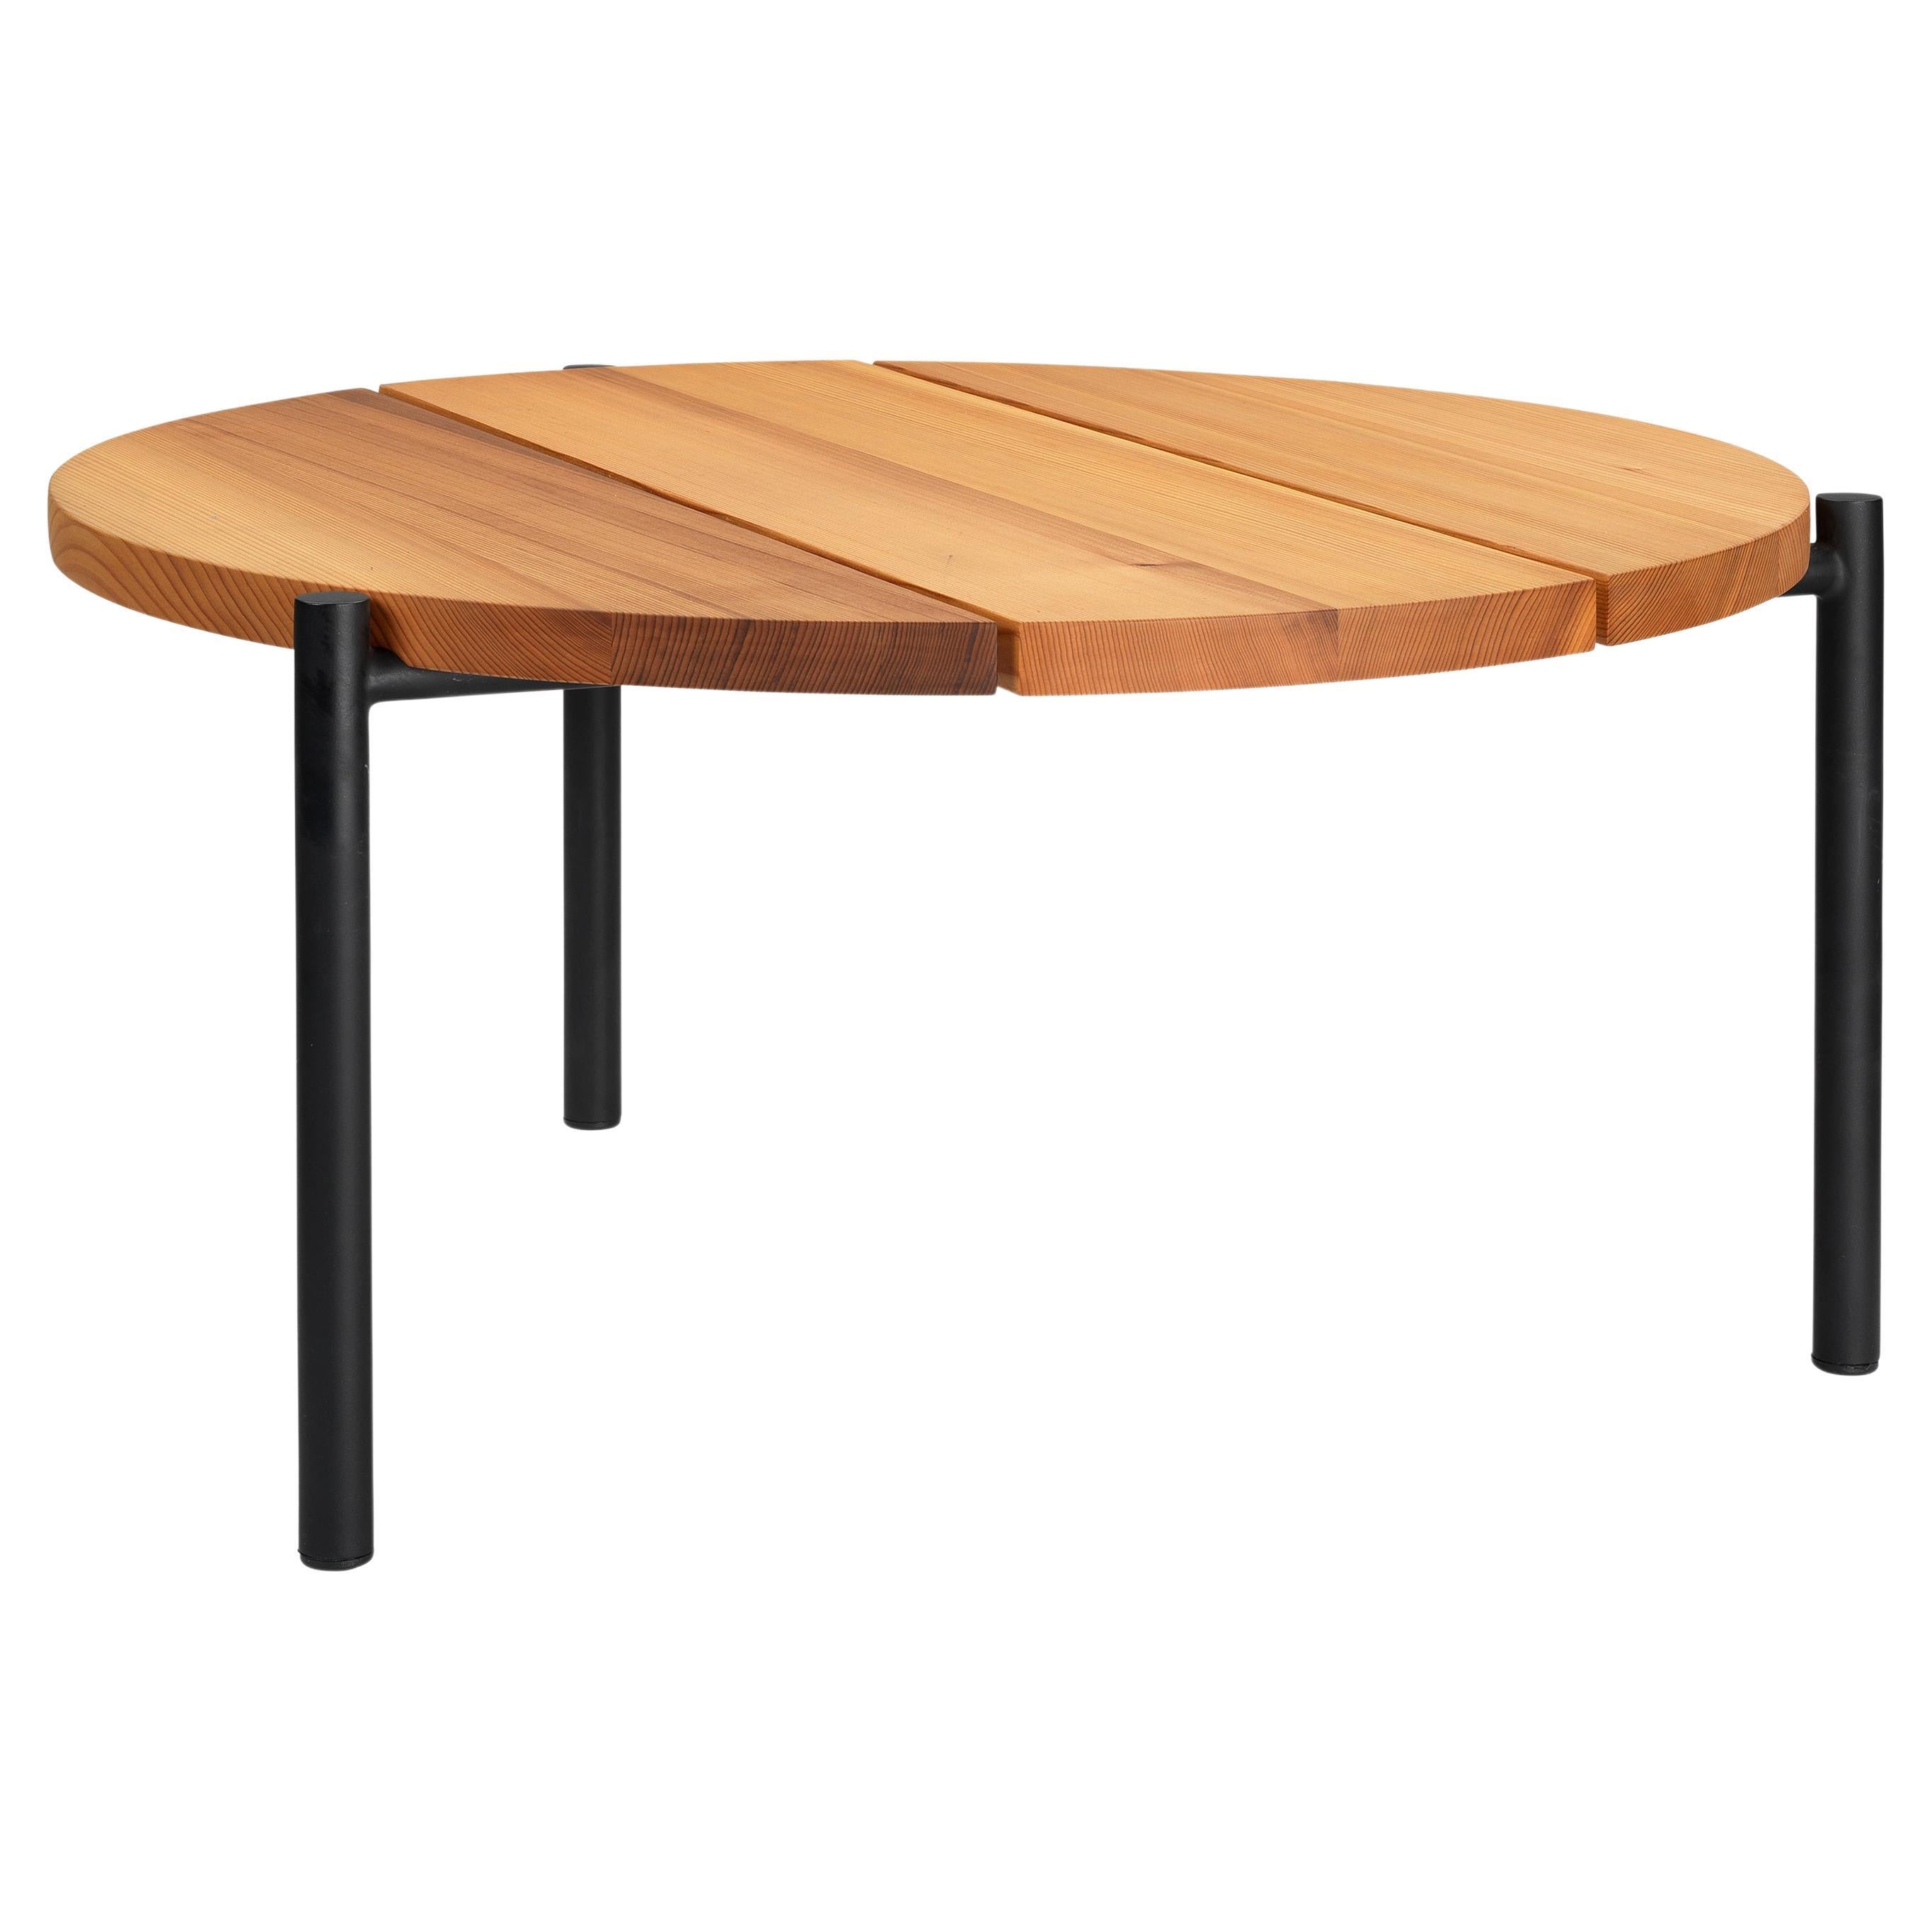 Ten10 Madeira Line Round Side Table Solid Plank Cedar Top Stainless Steel Base For Sale